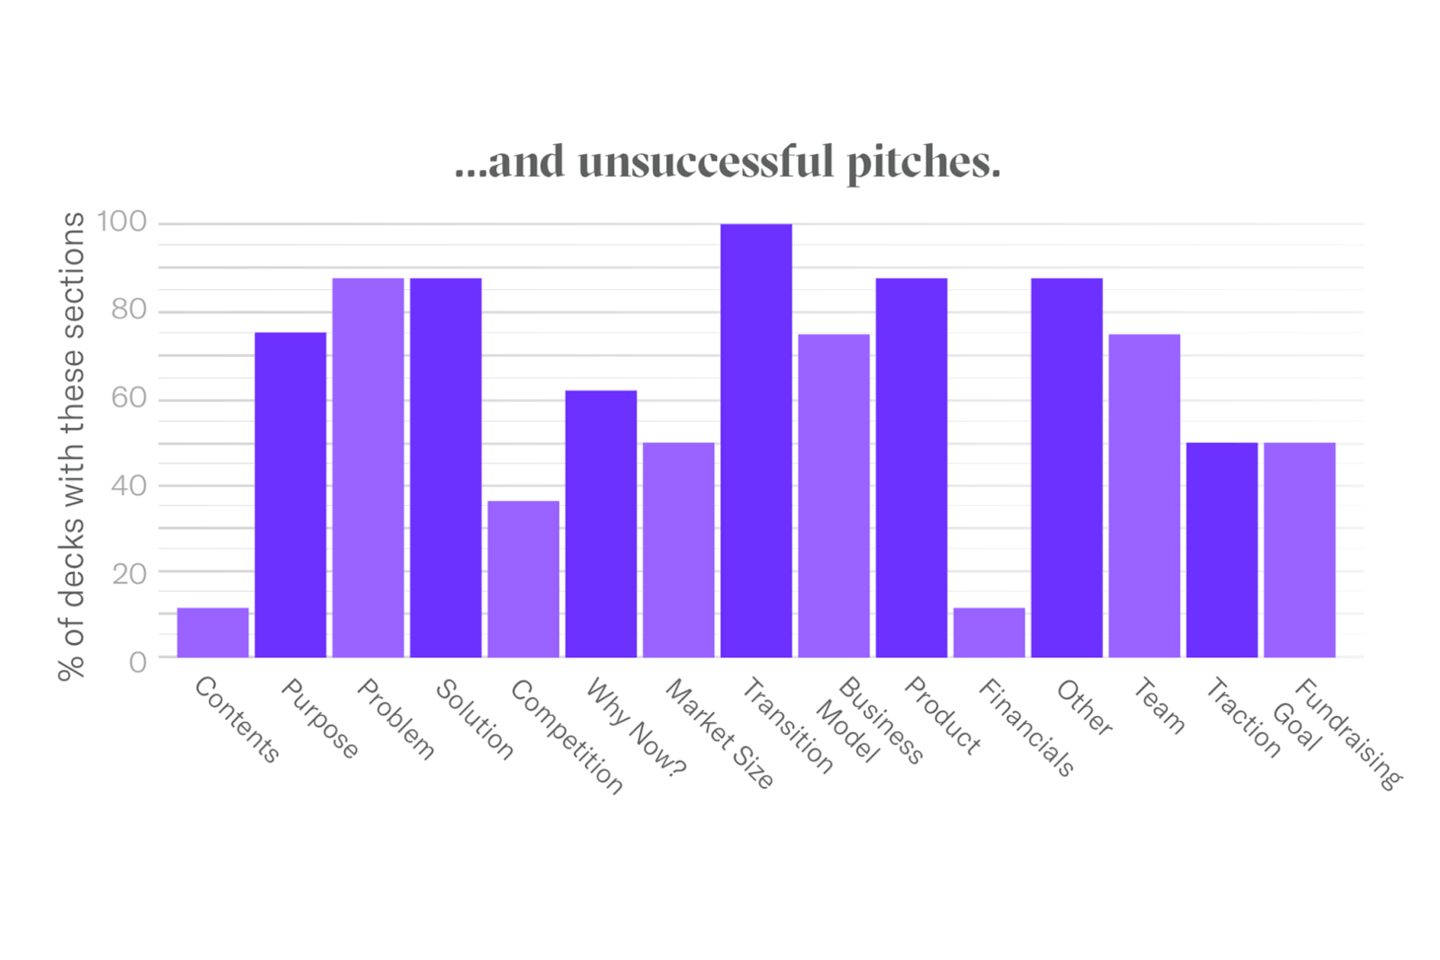 Bar graph showing slide order and focus areas for unsuccessful pitches